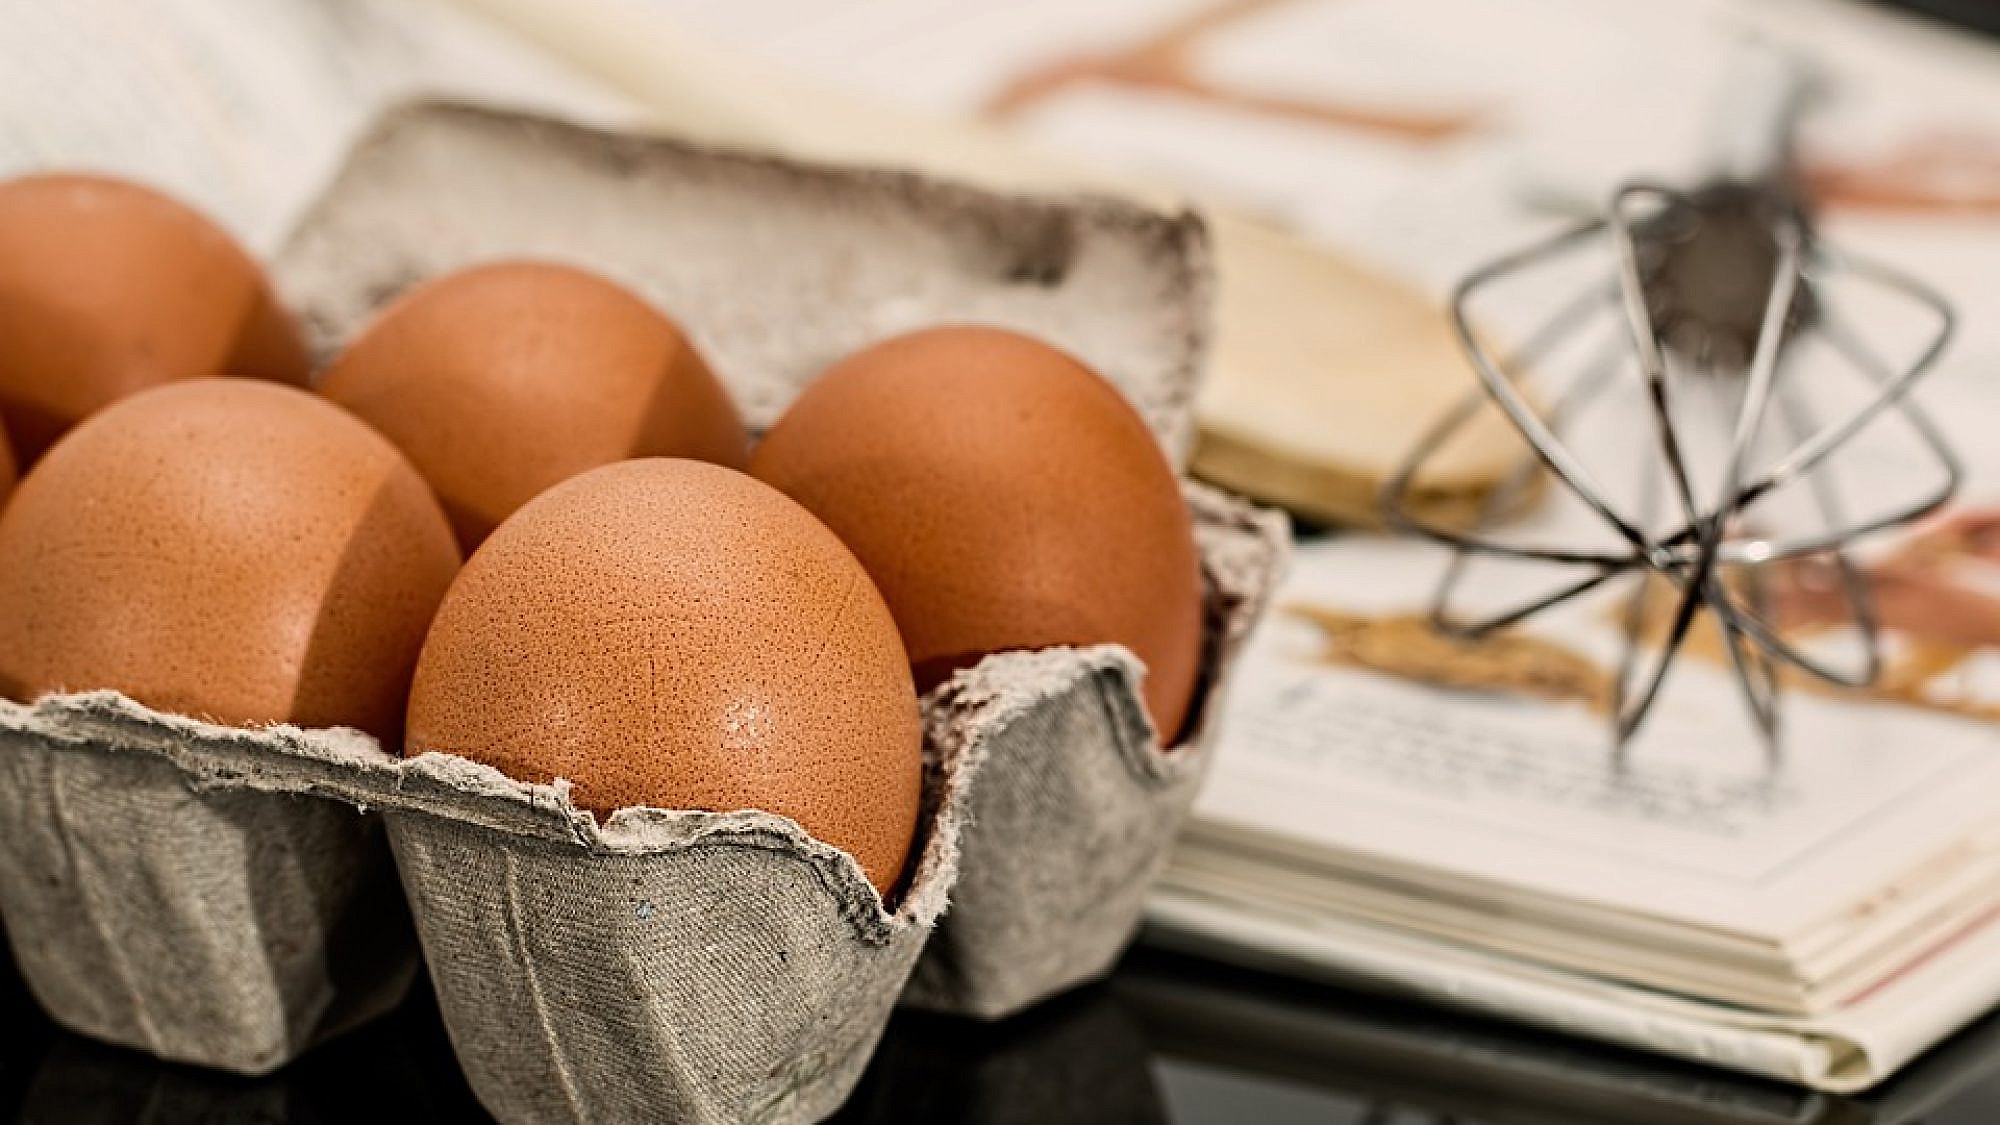 Eggs are a staple during the Passover holiday. Credit: Pixabay.